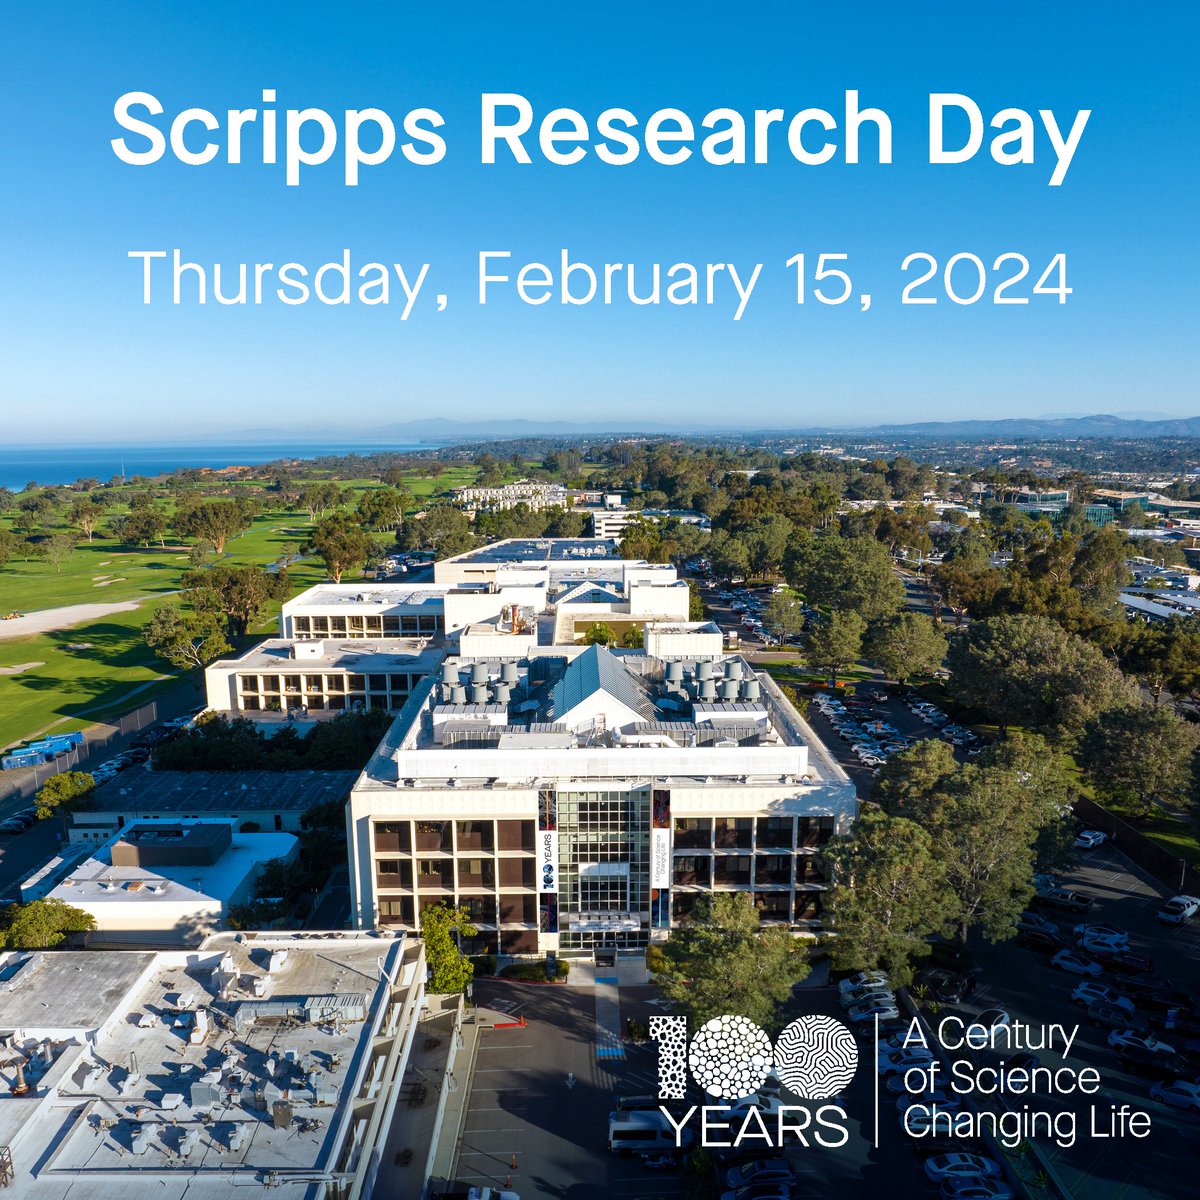 The City of San Diego declares today 'Scripps Research Day' in honor of the institute's century of discoveries into life-saving medicines, as well as for its influential force in shaping the local bioscience community. Learn more: 100.scripps.edu